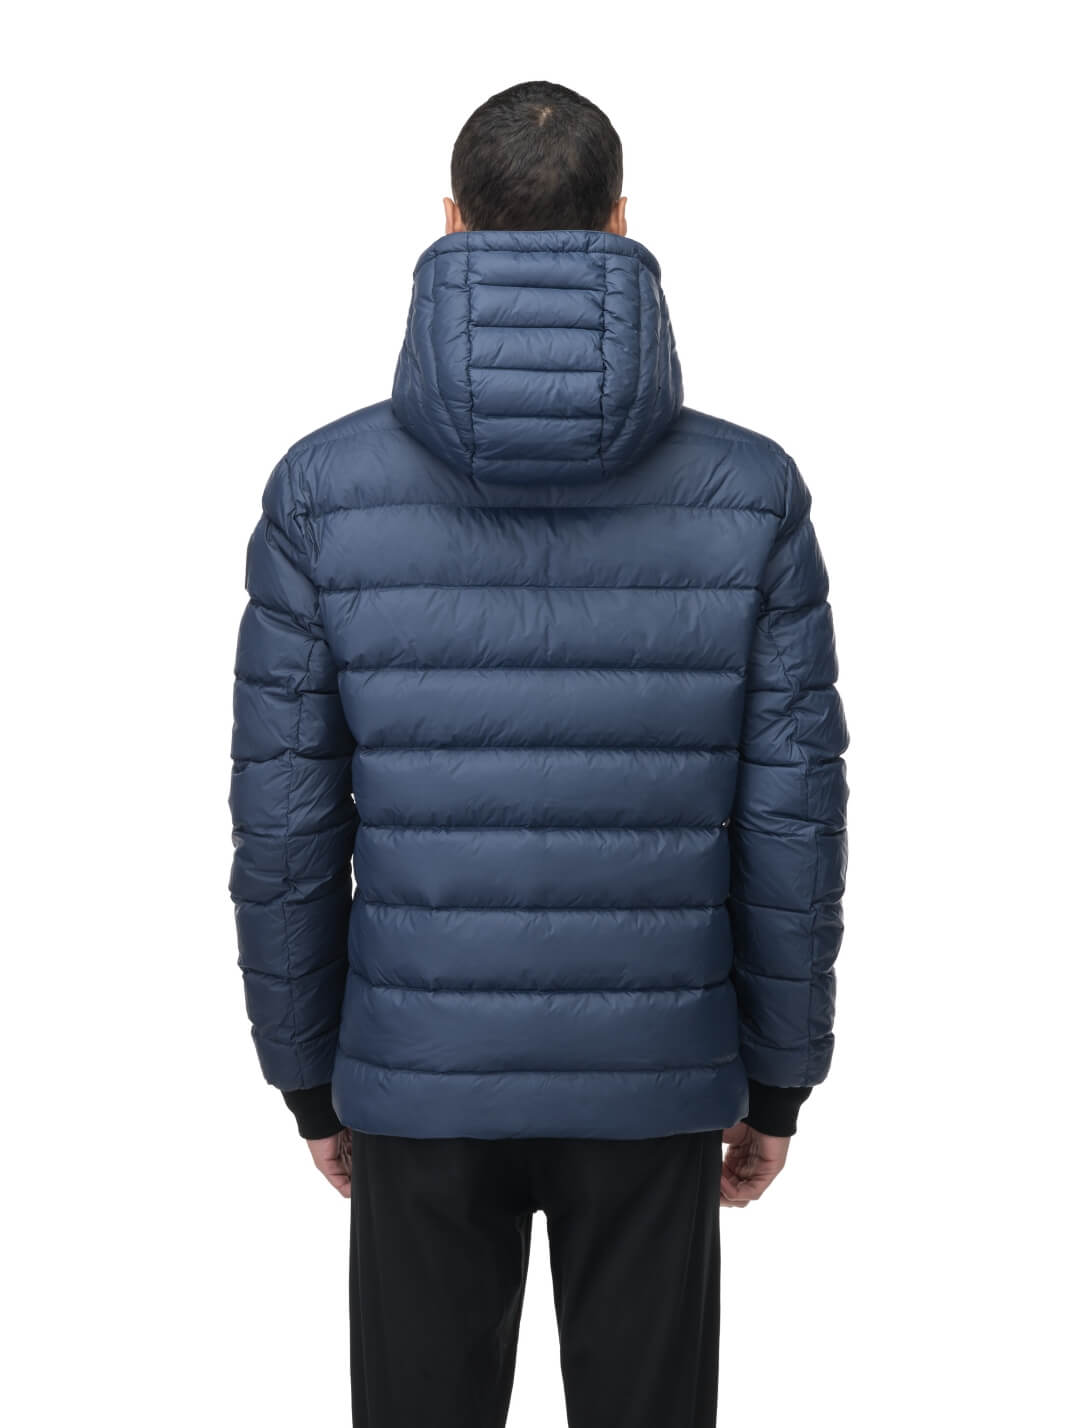 Chris Men's Mid Weight Reversible Puffer Jacket in hip length, Canadian duck down insulation, non-removable adjustable hood, ribbed cuffs, and quilted body on reversible side, in Marine